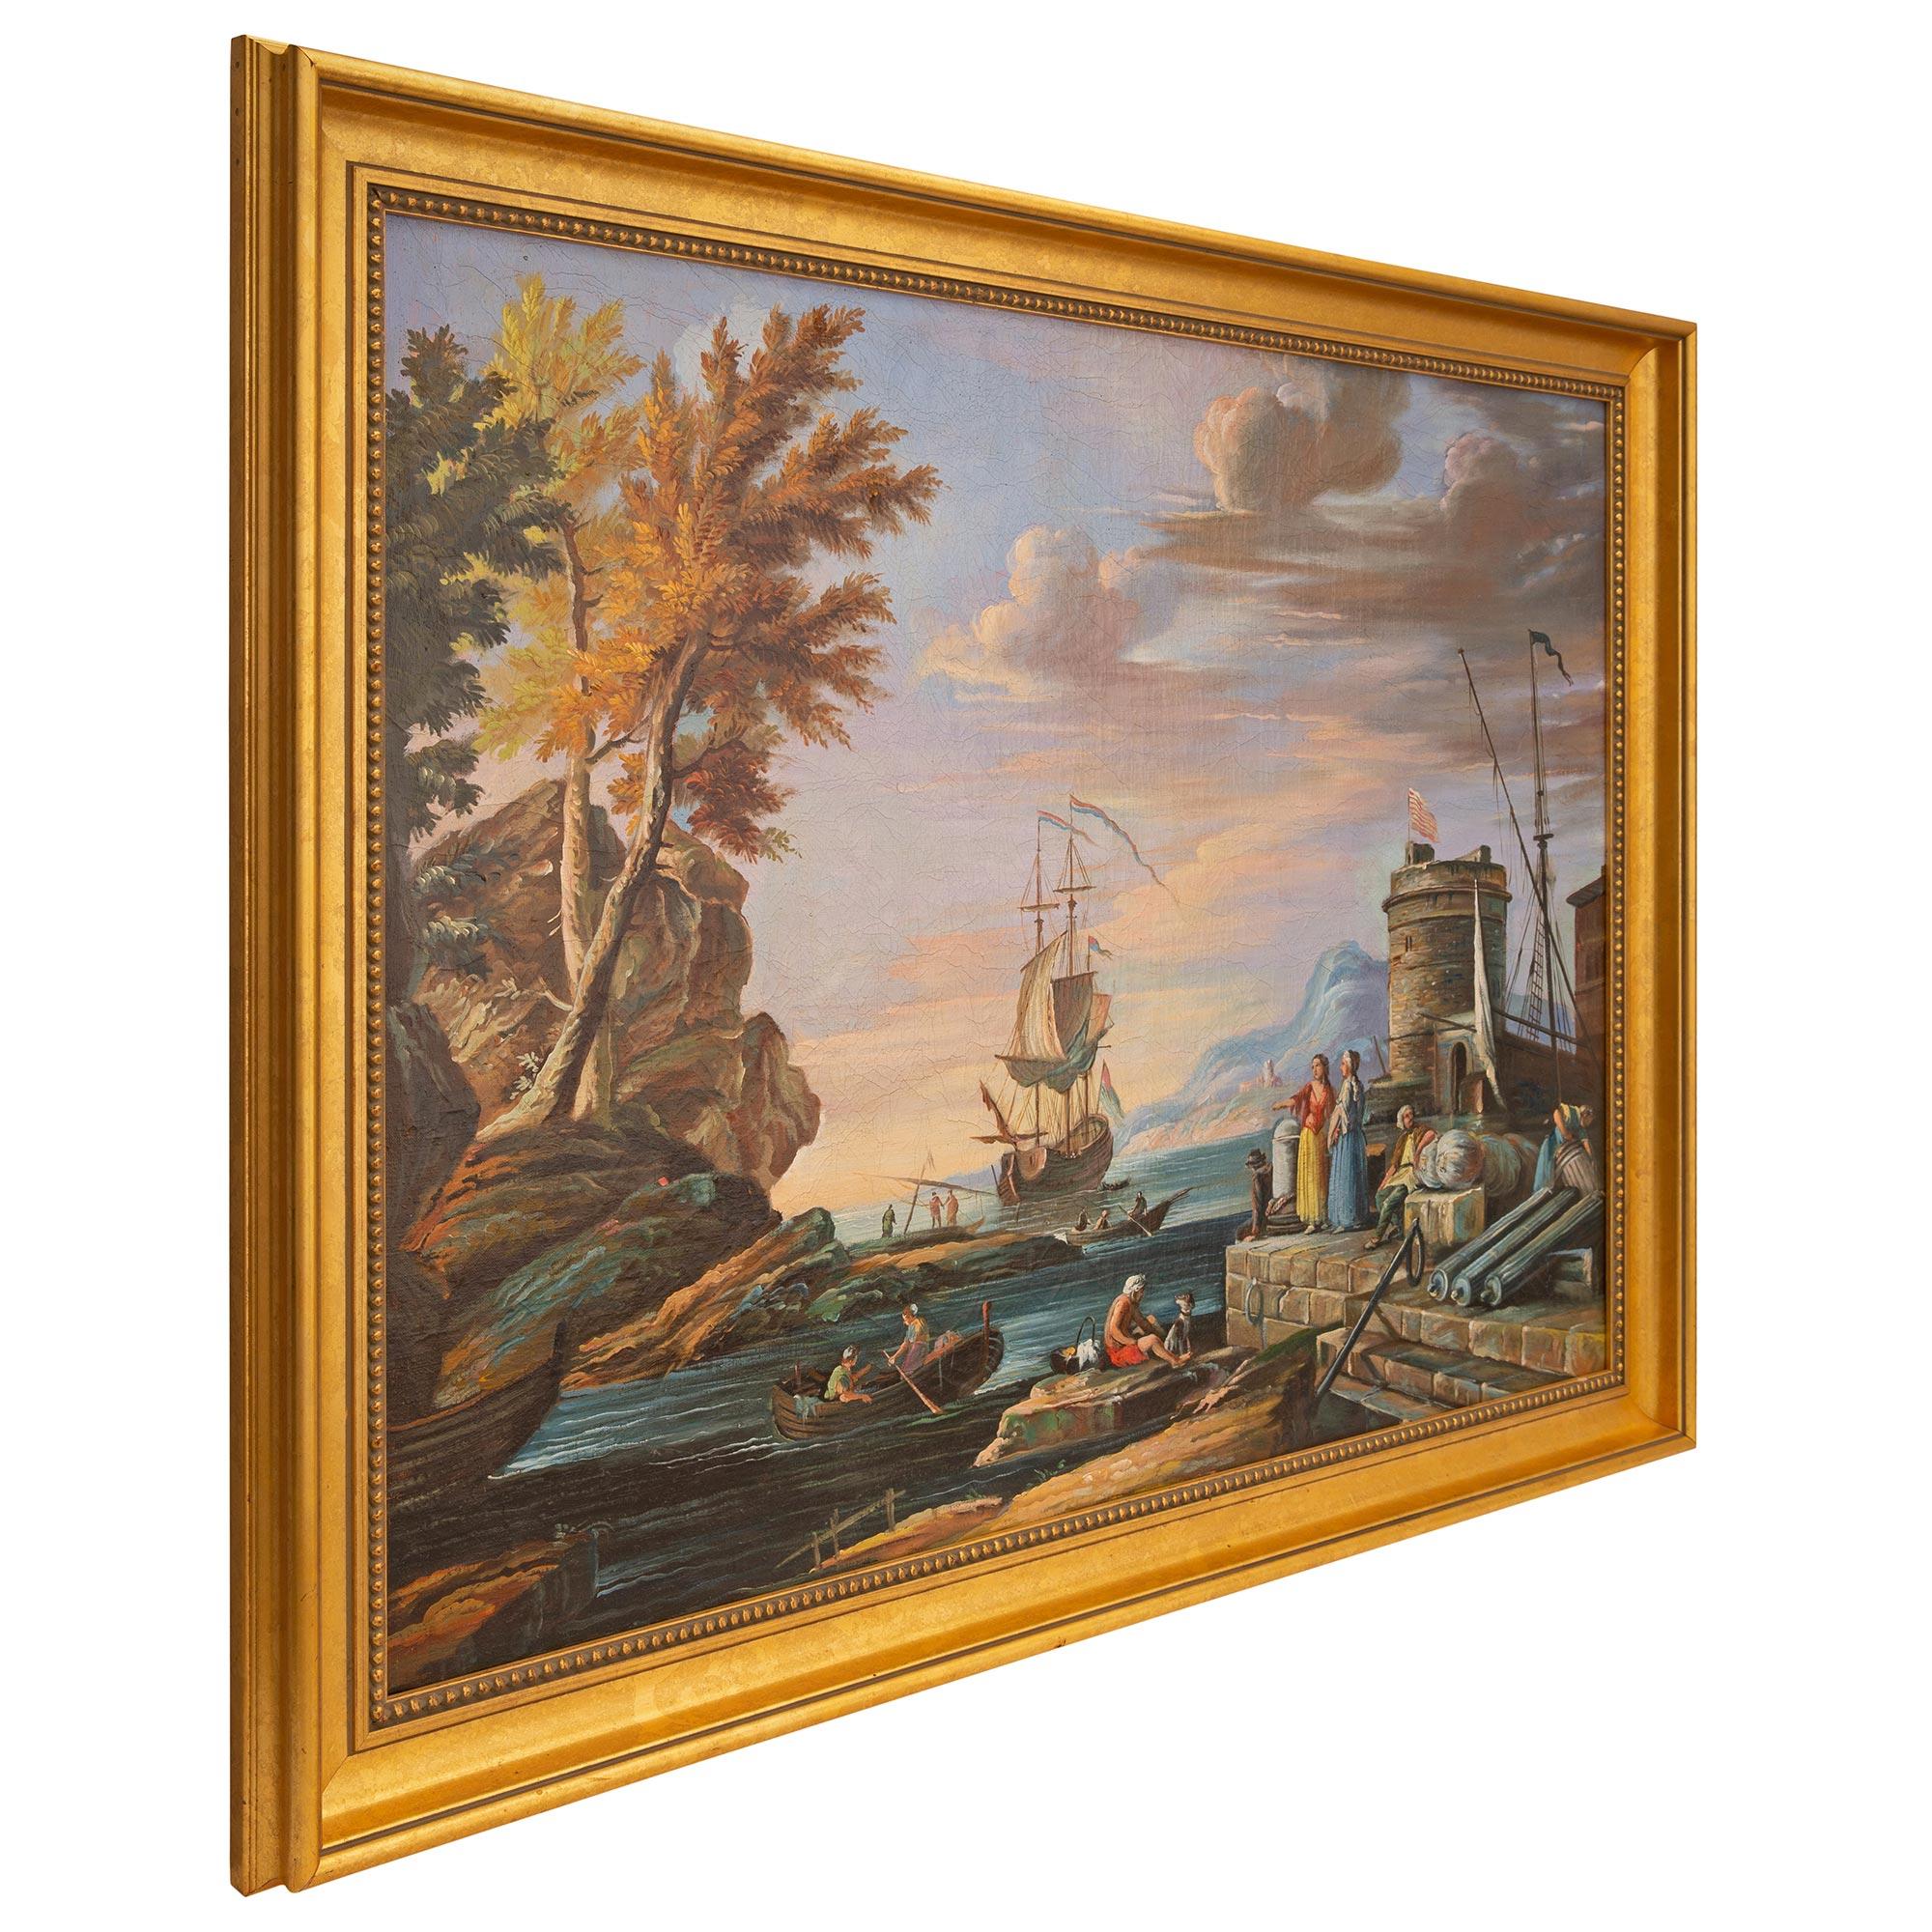 A stunning Italian 18th century oil on canvas painting in a giltwood frame. The painting depicts a calm bay at dusk with an anchored sailboat at the center and the beautiful Italian mountains in the background. At the forefront are charming rowboats